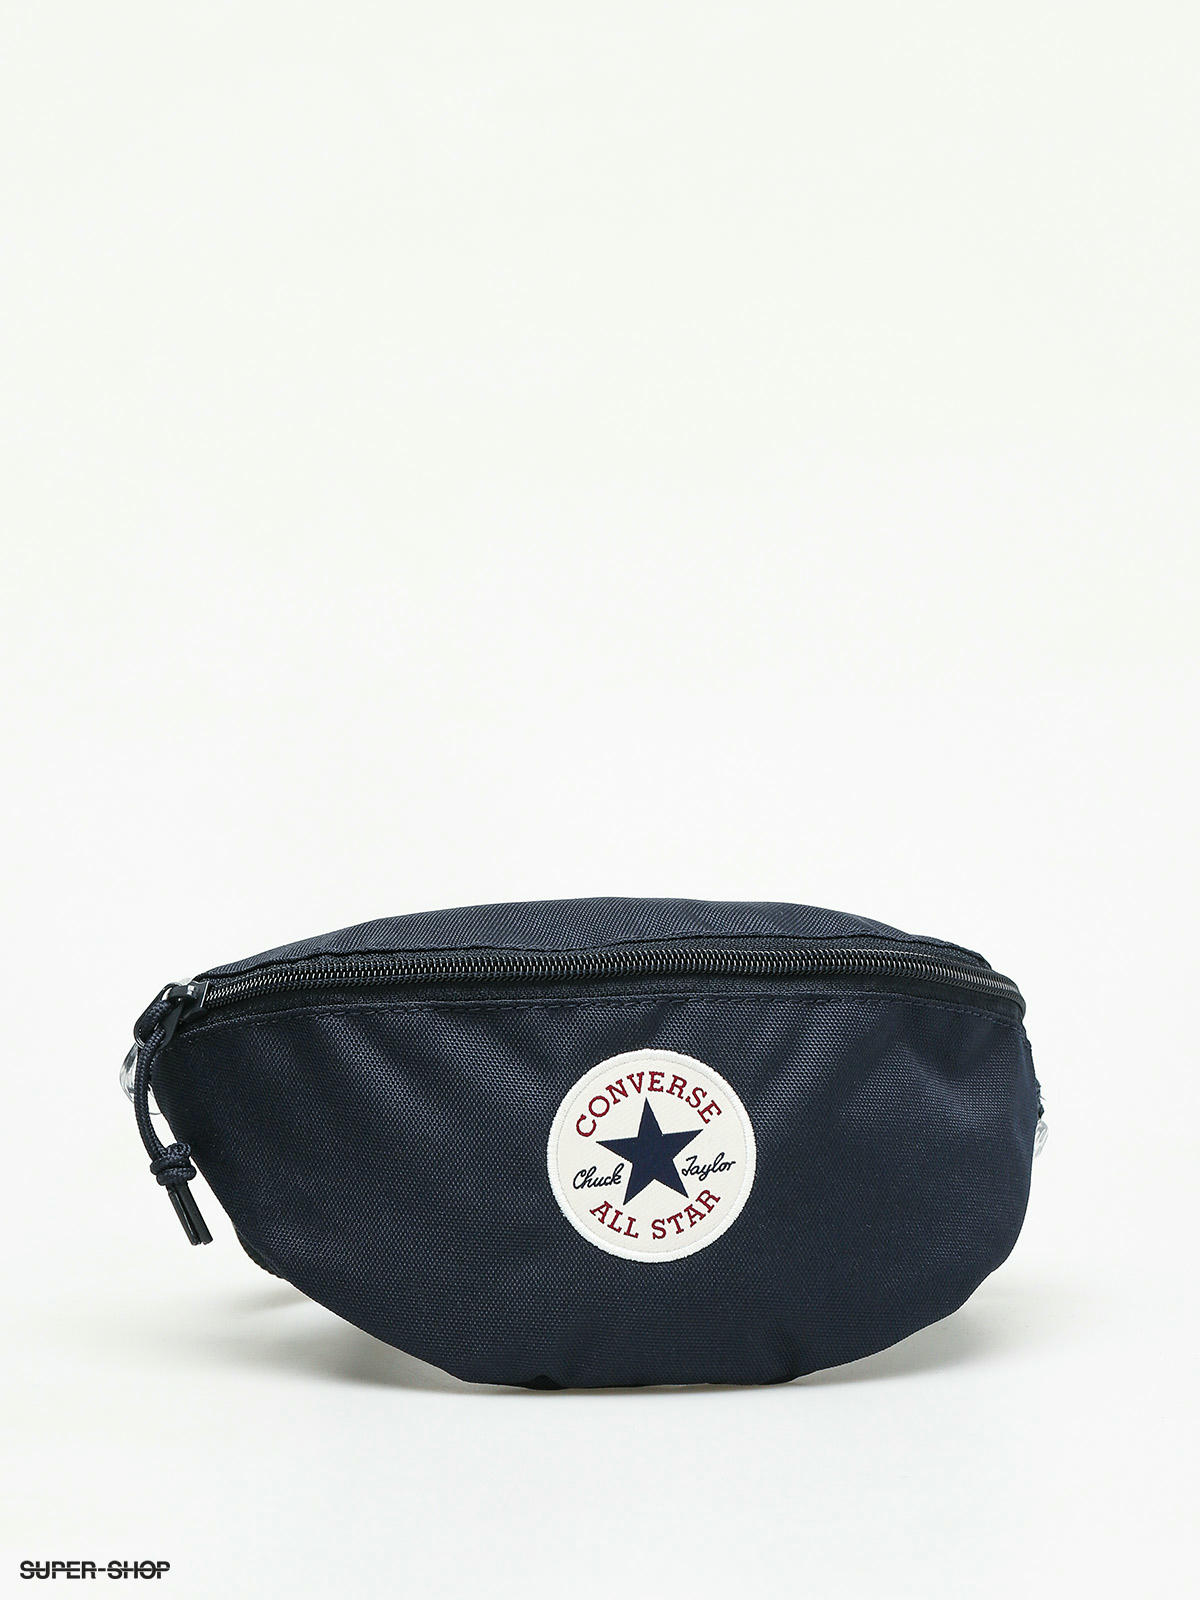 converse bags online store